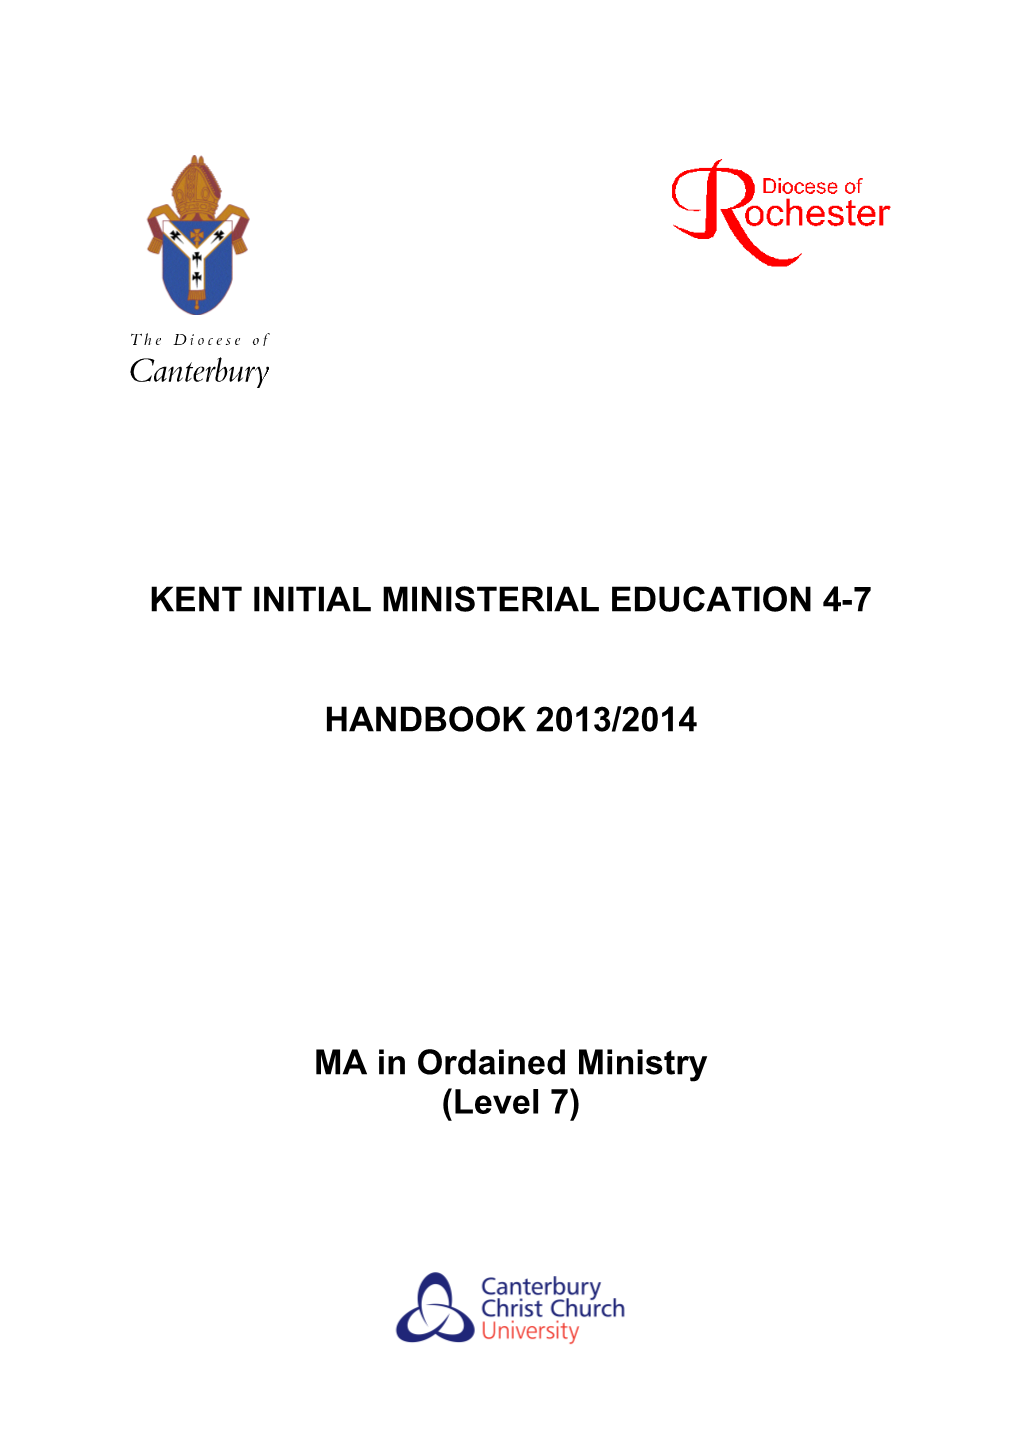 Kent Initial Ministerial Education 4-7